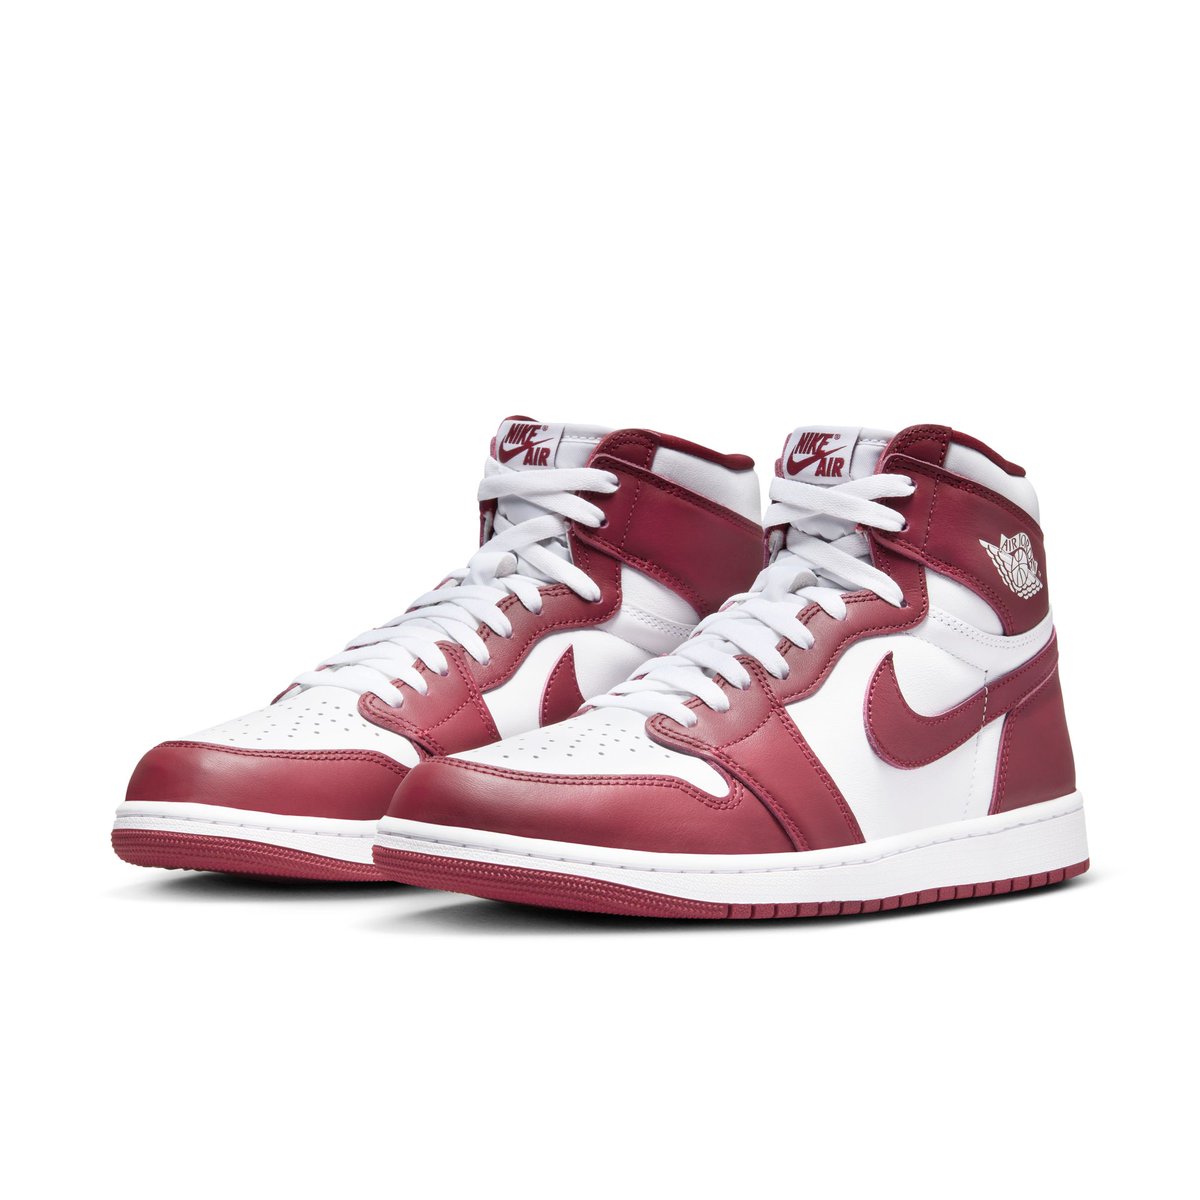 The Air Jordan 1 retro High OG - 'Team Red' is now available on our online store - Men's soleplayatl.com/products/mens-… Big Kid's soleplayatl.com/products/big-k… Little Kid's soleplayatl.com/products/littl… Toddler soleplayatl.com/products/toddl…